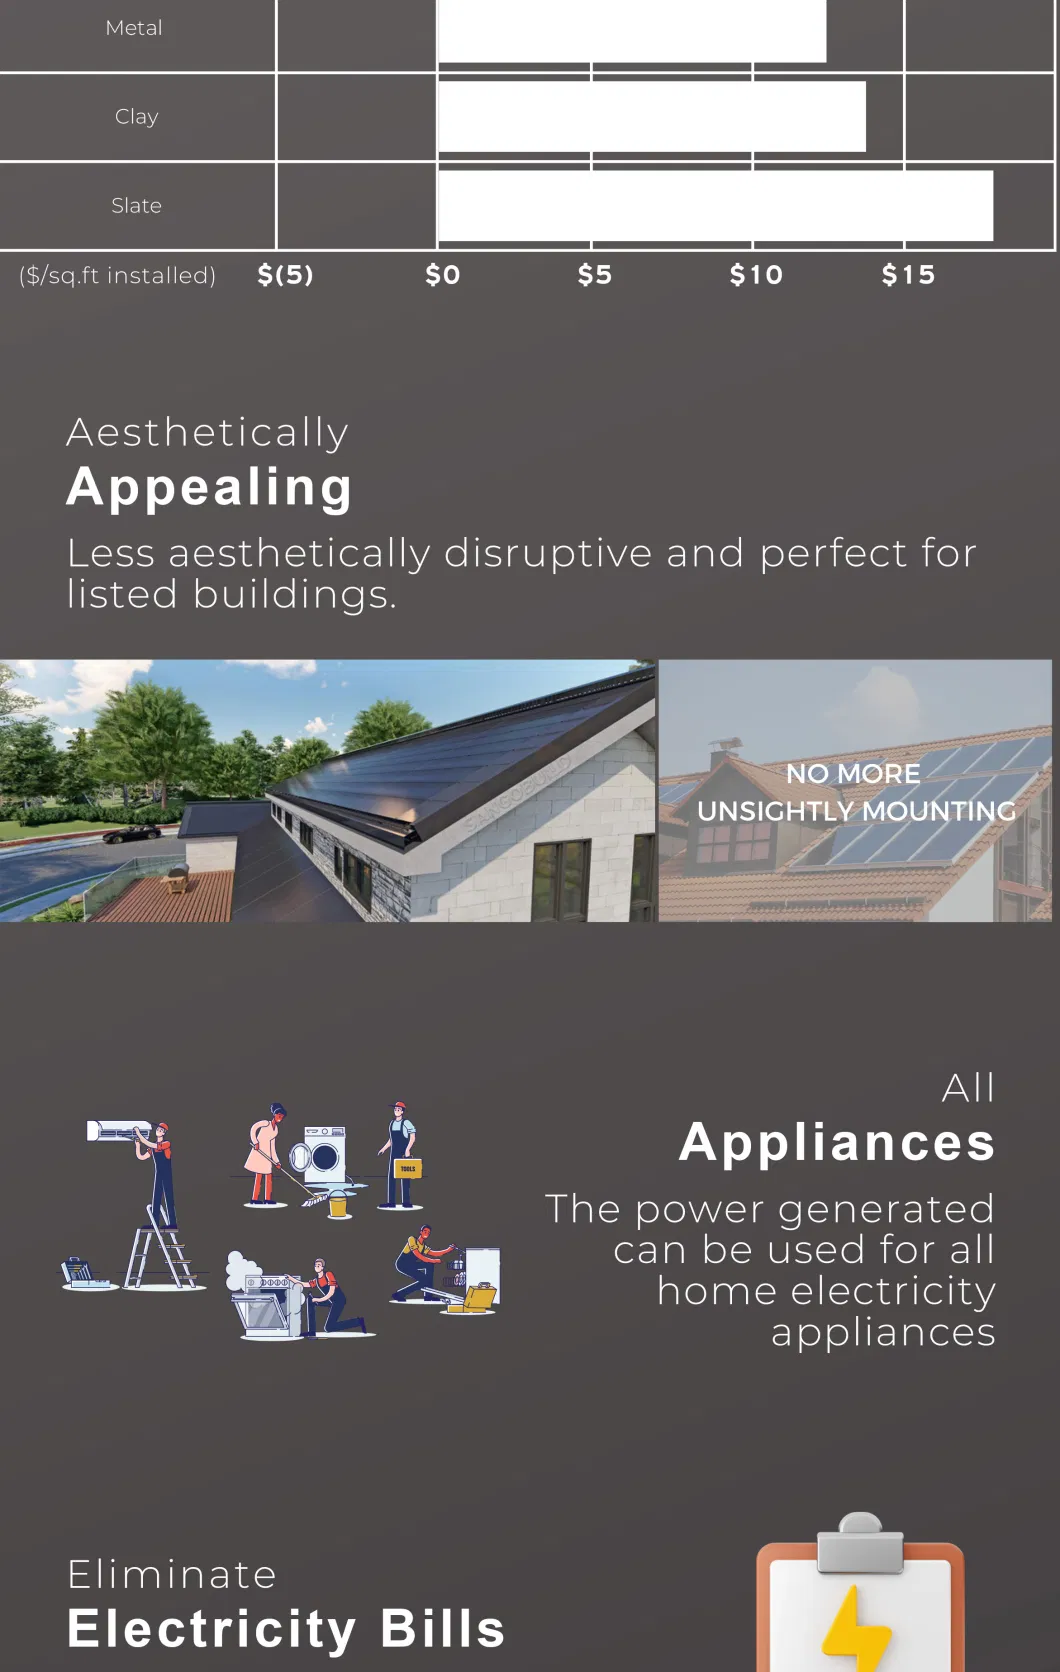 France Solar Tile No Mounting Install Solar Roof Tile Tuile Solaire Reduce Electricity Bills